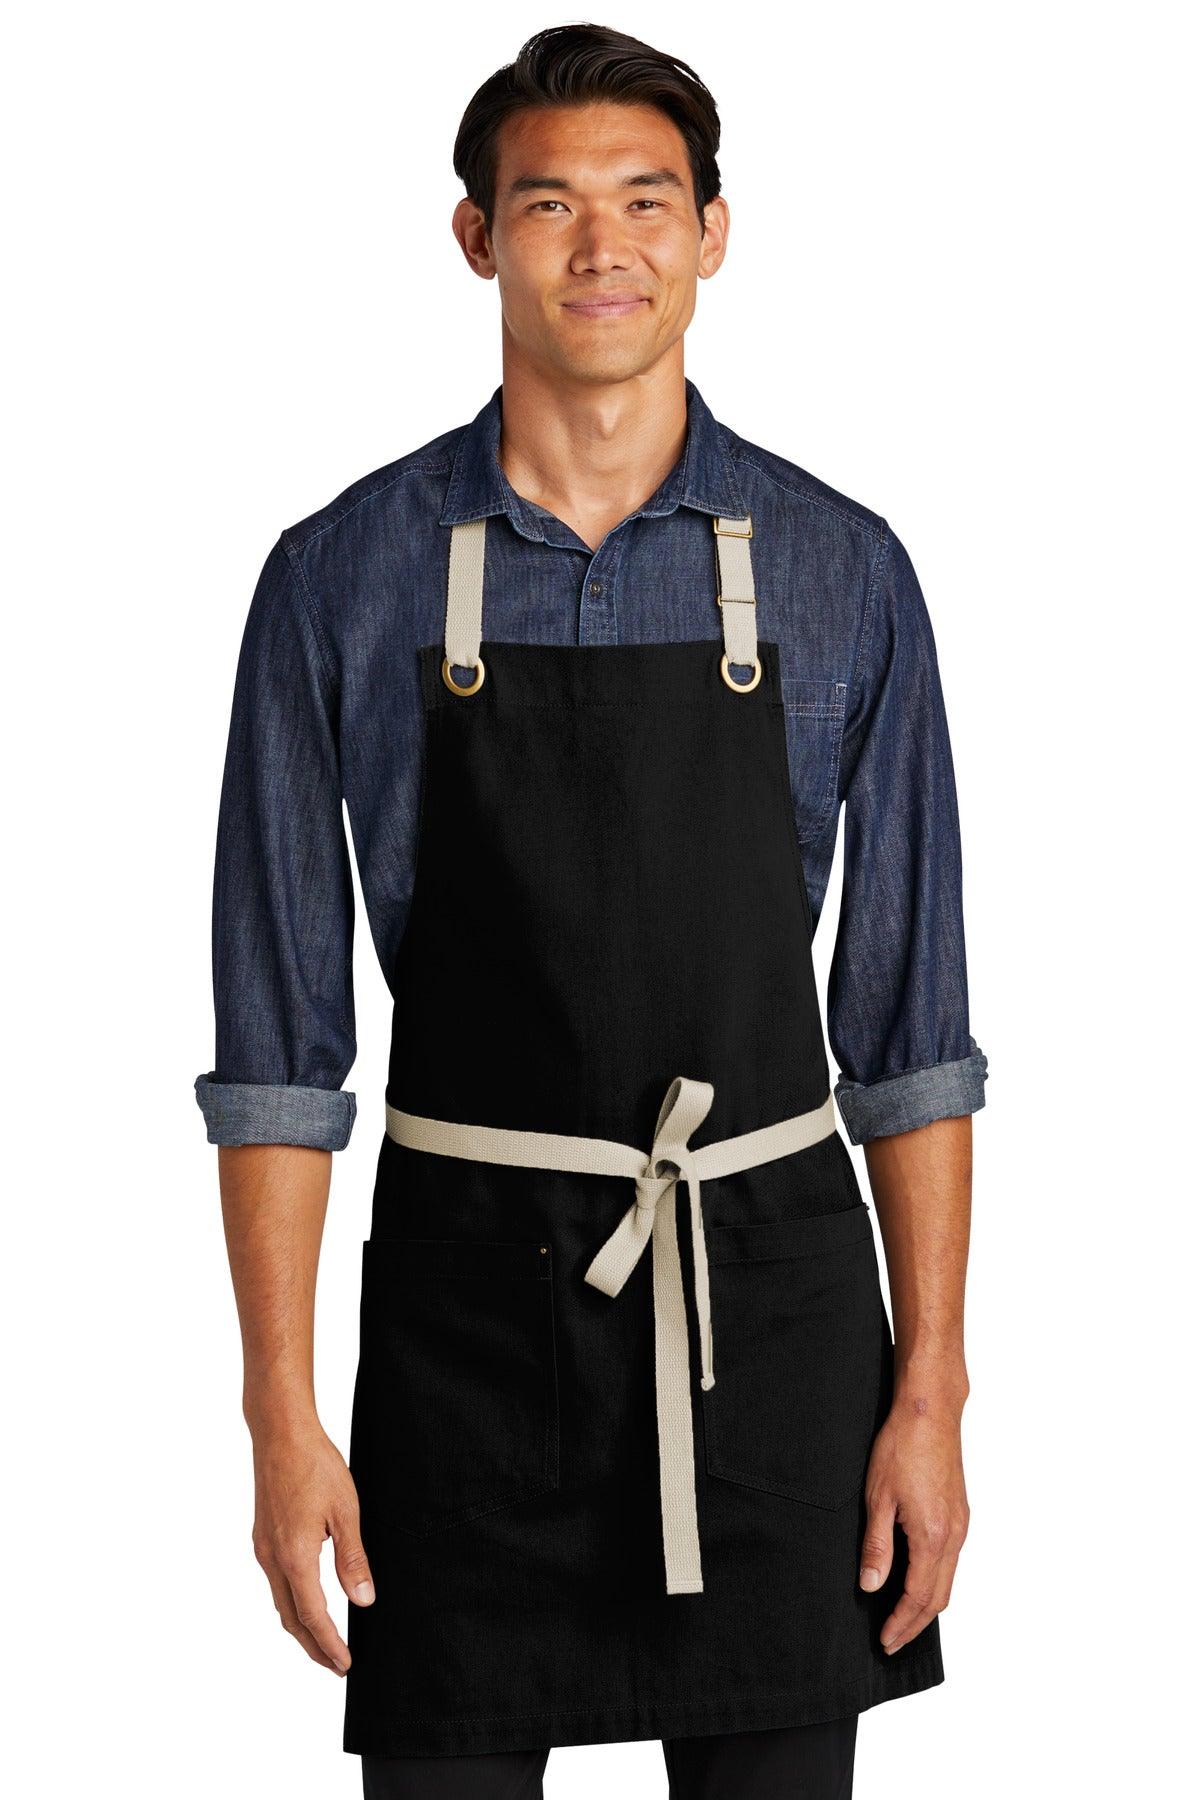 Port Authority Canvas Full-Length Two-Pocket Apron A815 - Dresses Max